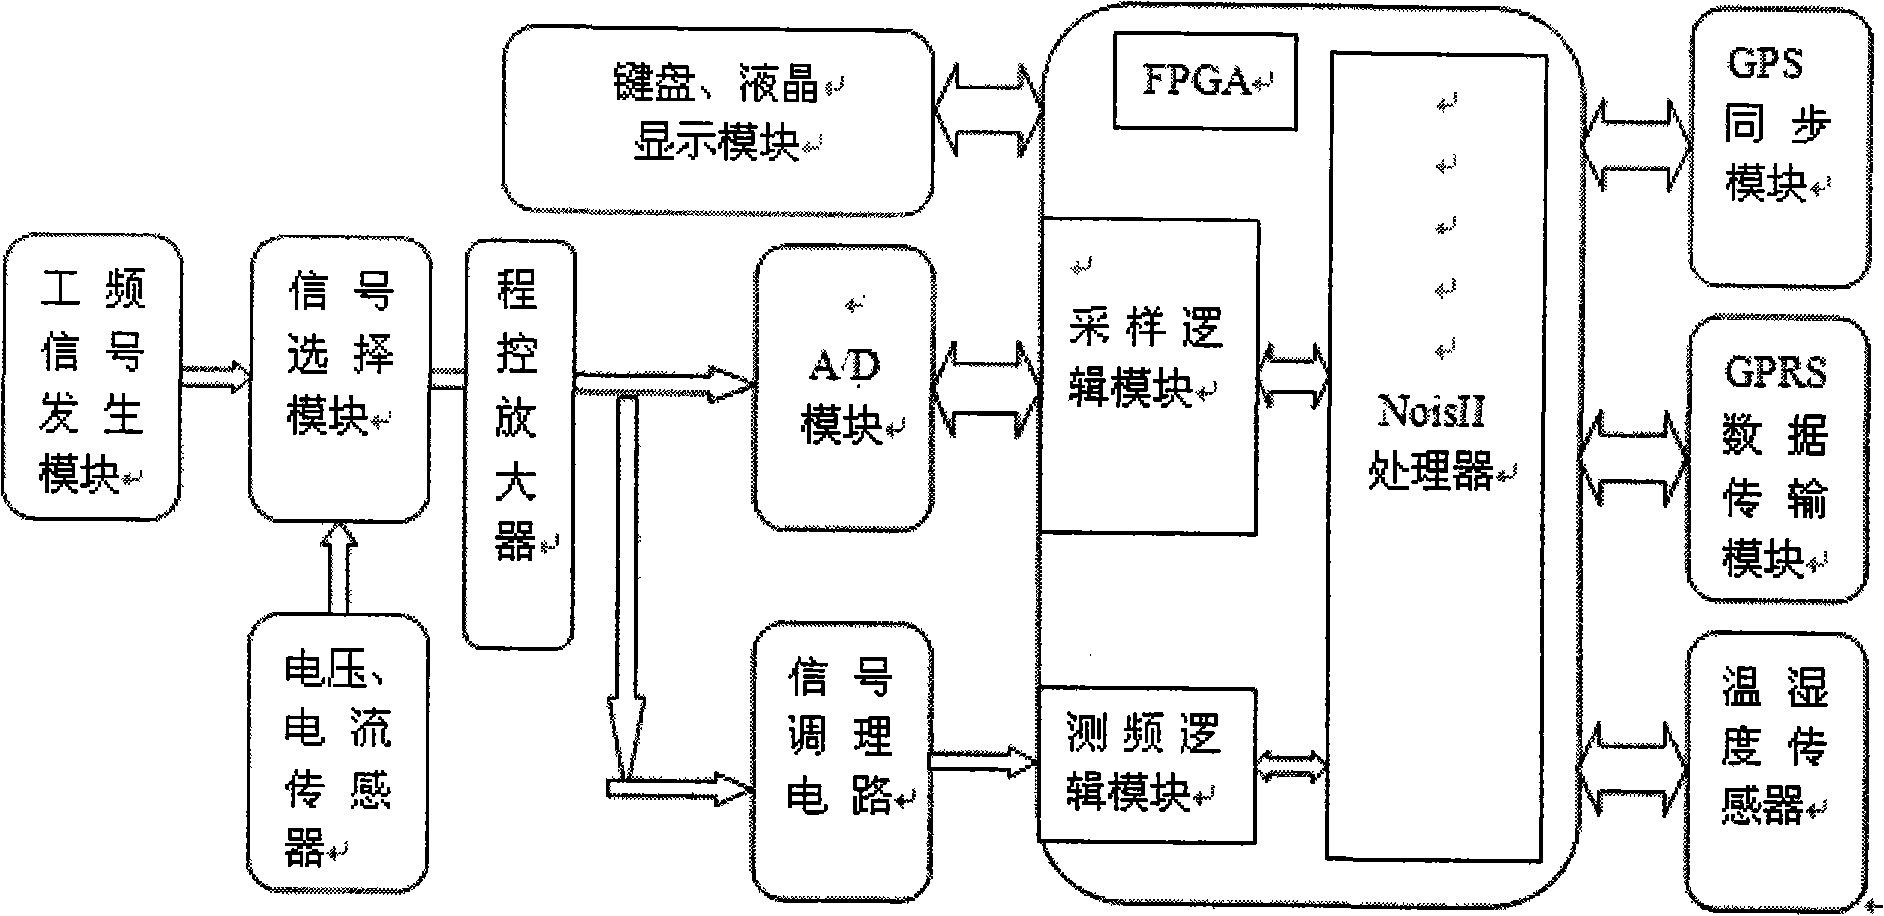 On-line monitoring system for capacitive equipment dielectric loss angle